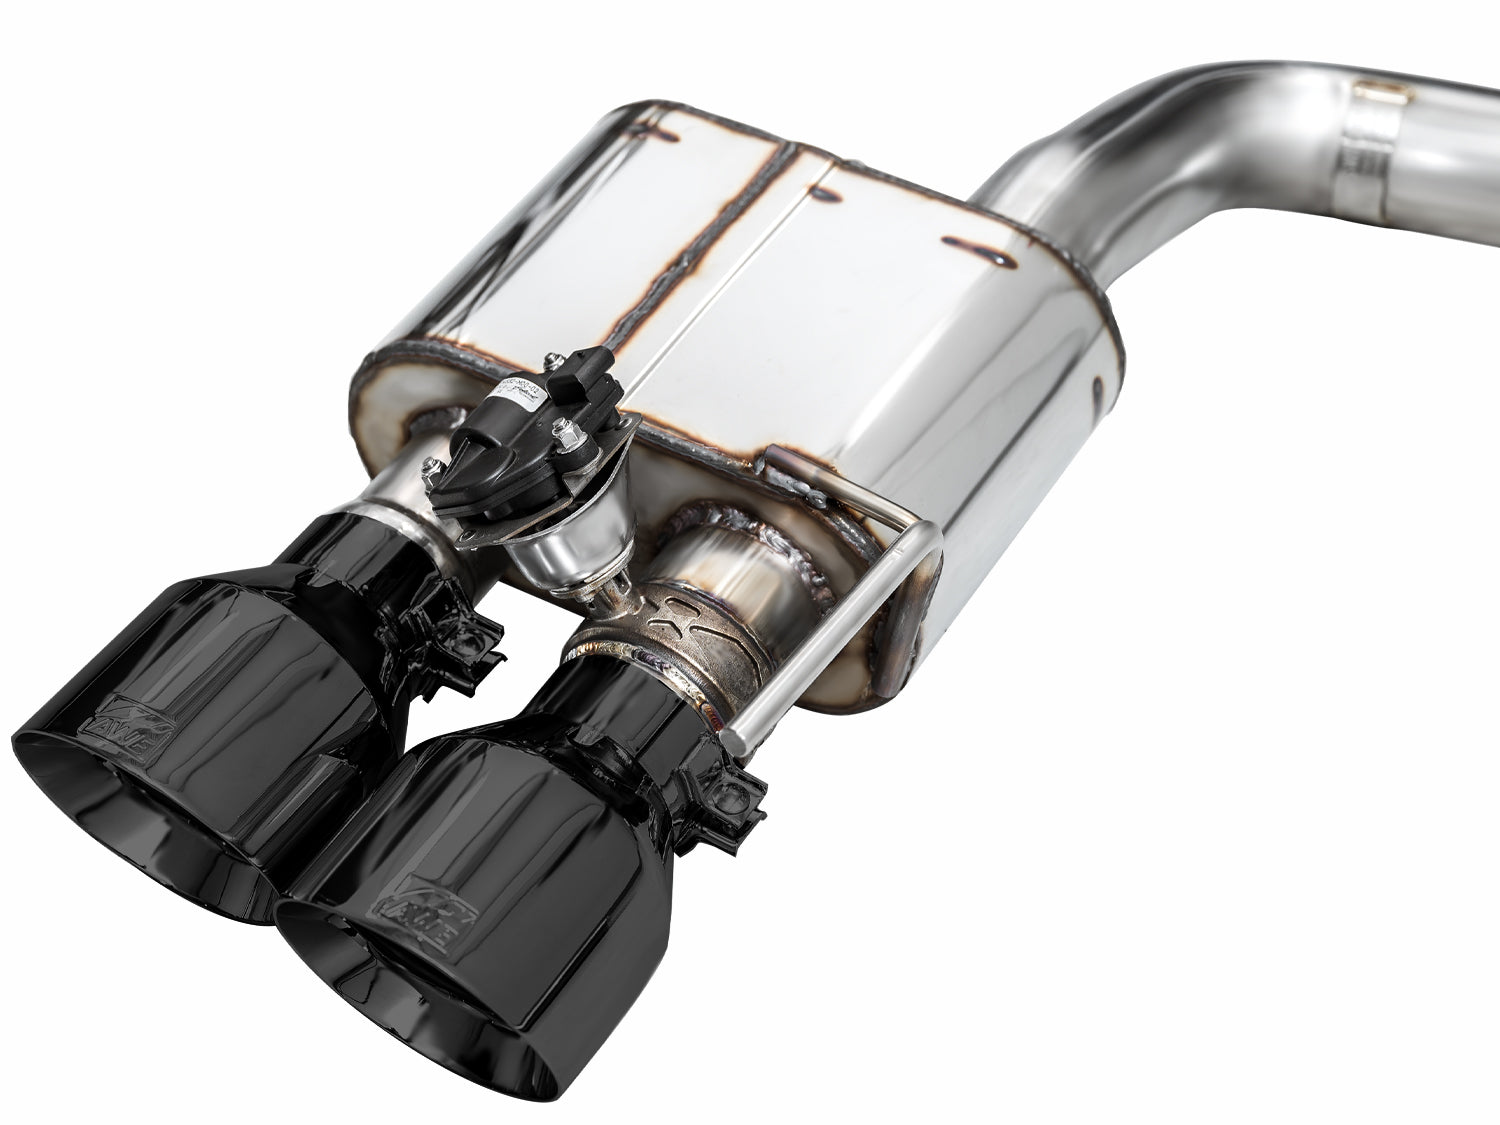 AWE EXHAUST SUITE FOR S650 MUSTANG DARK HORSE